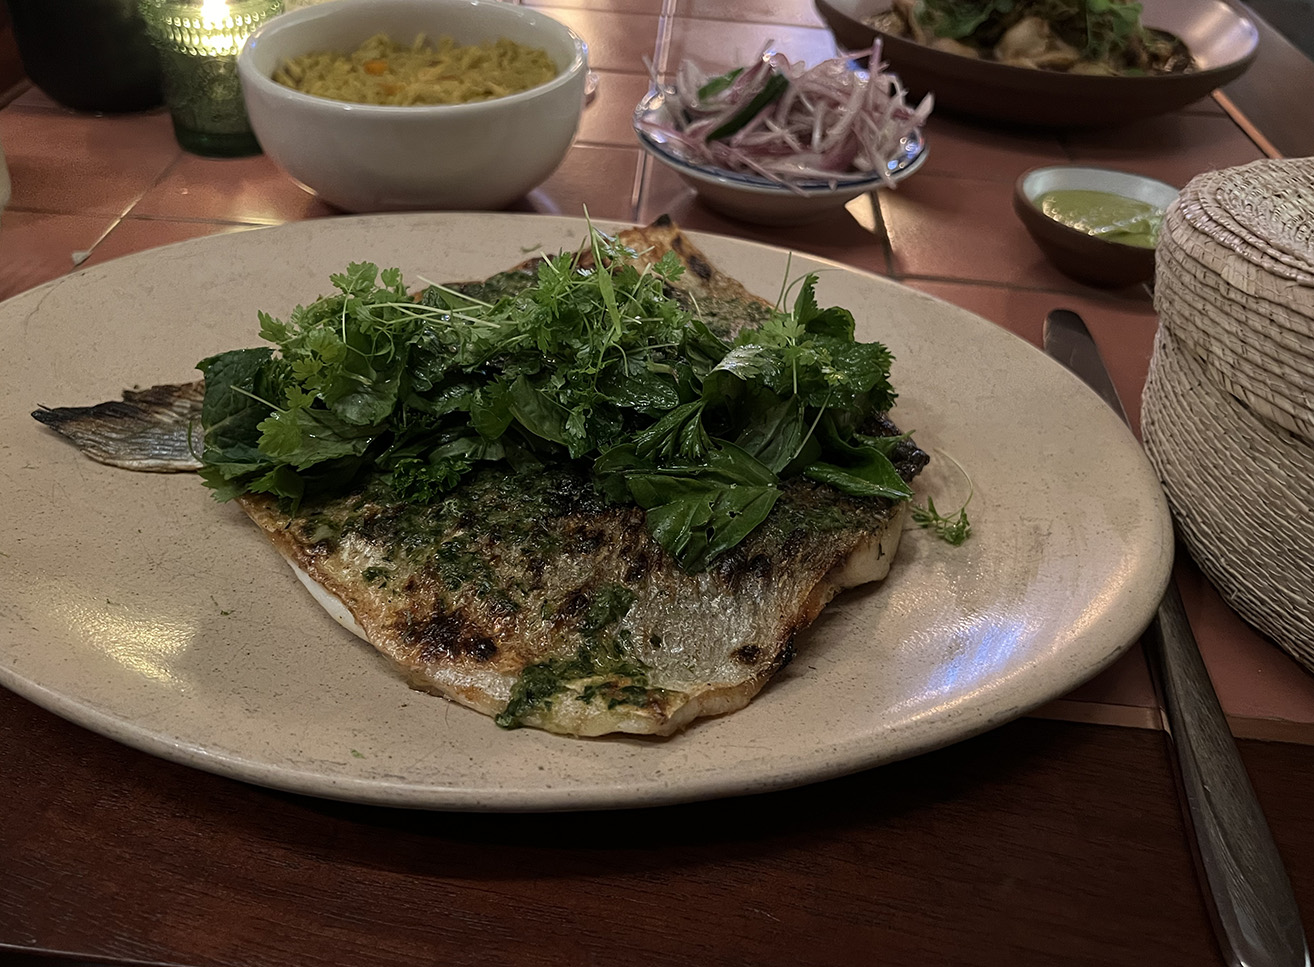 Catch of the Day (Seabream) at Maizano Restaurant in Costa Mesa, California (Photo by Julie Nguyen)